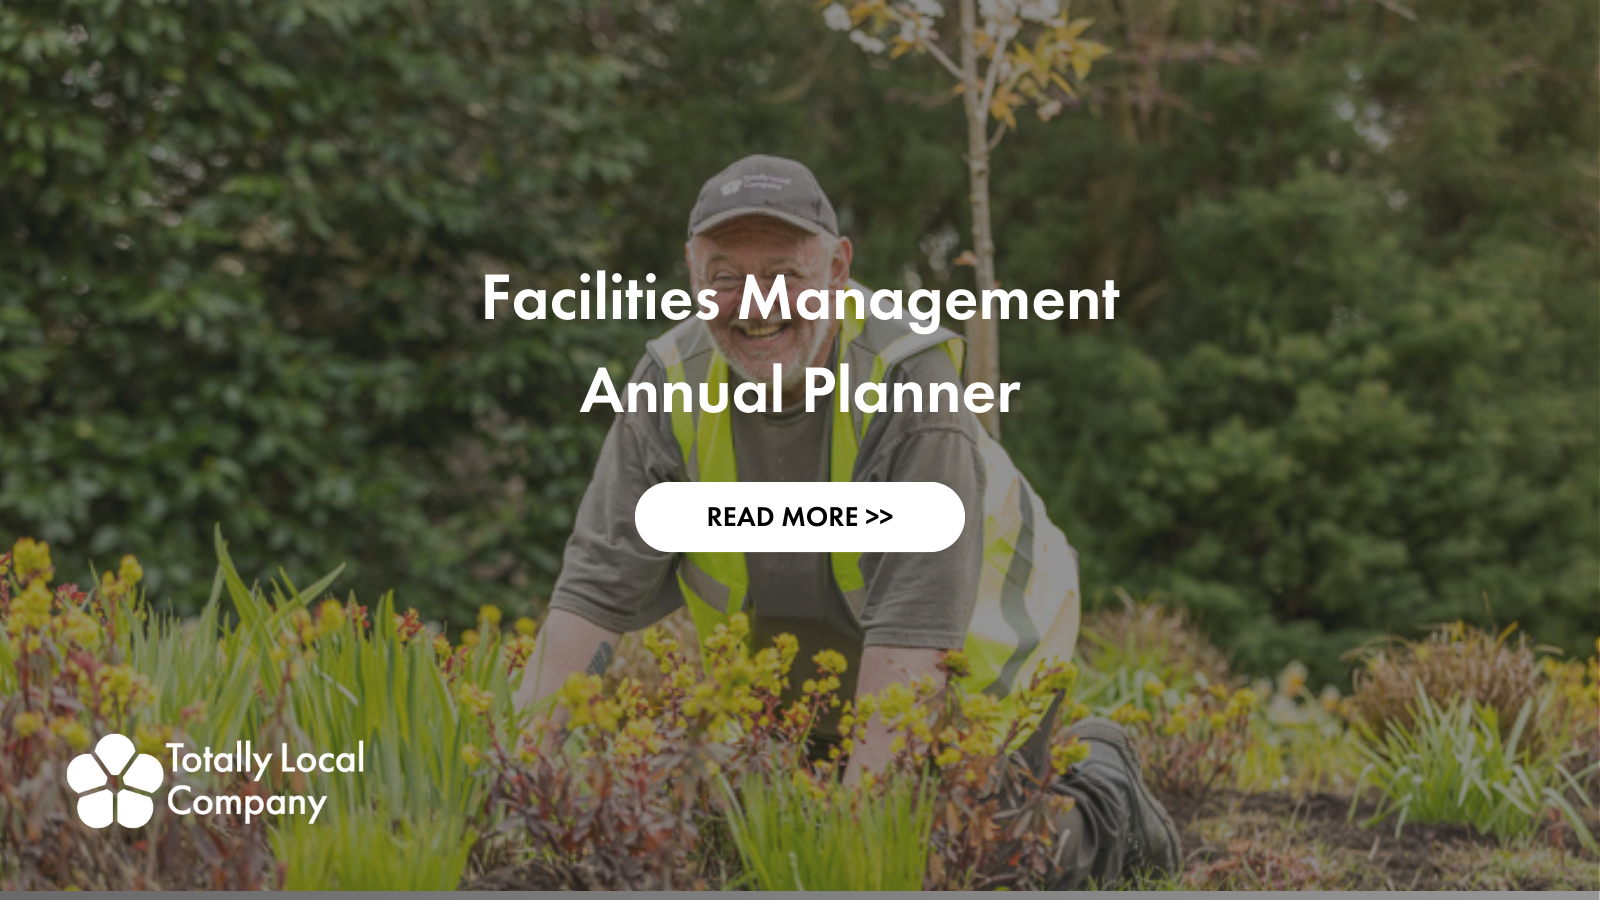 Your Facilities Management Annual Planner